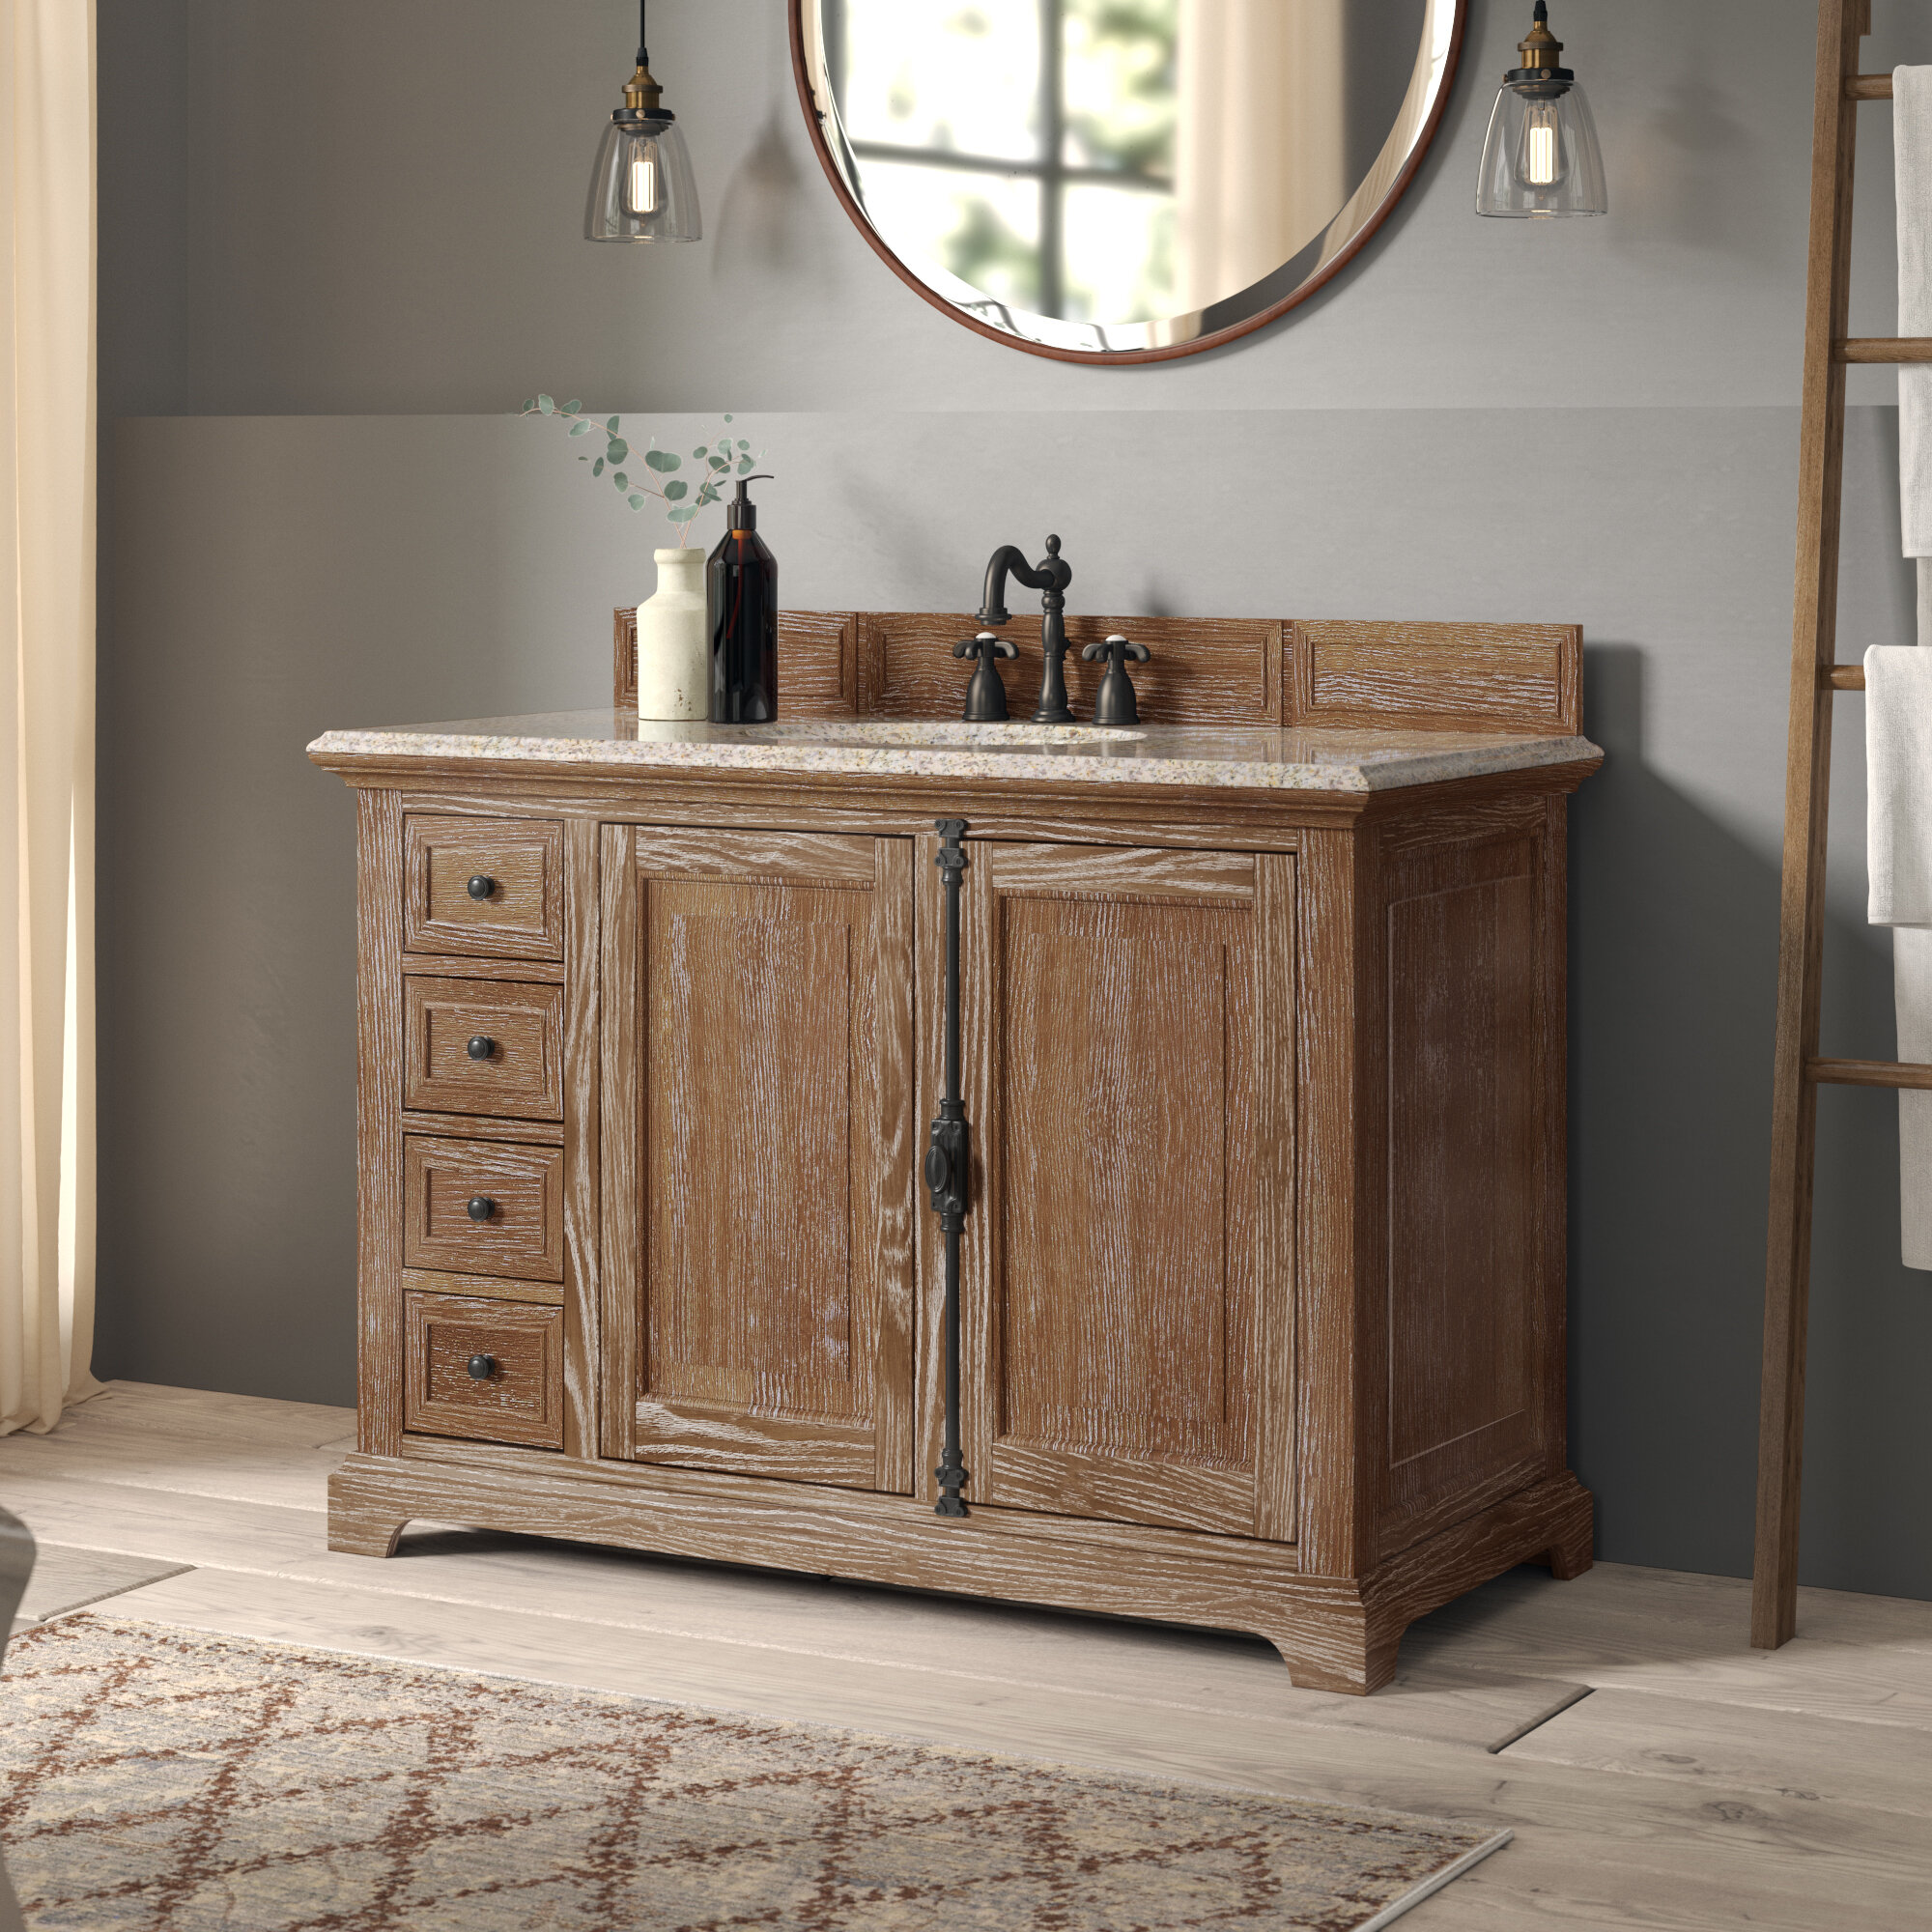 Darby Home Co Cuyuna 48 Single Cabinet Vanity Base Only Reviews Wayfair